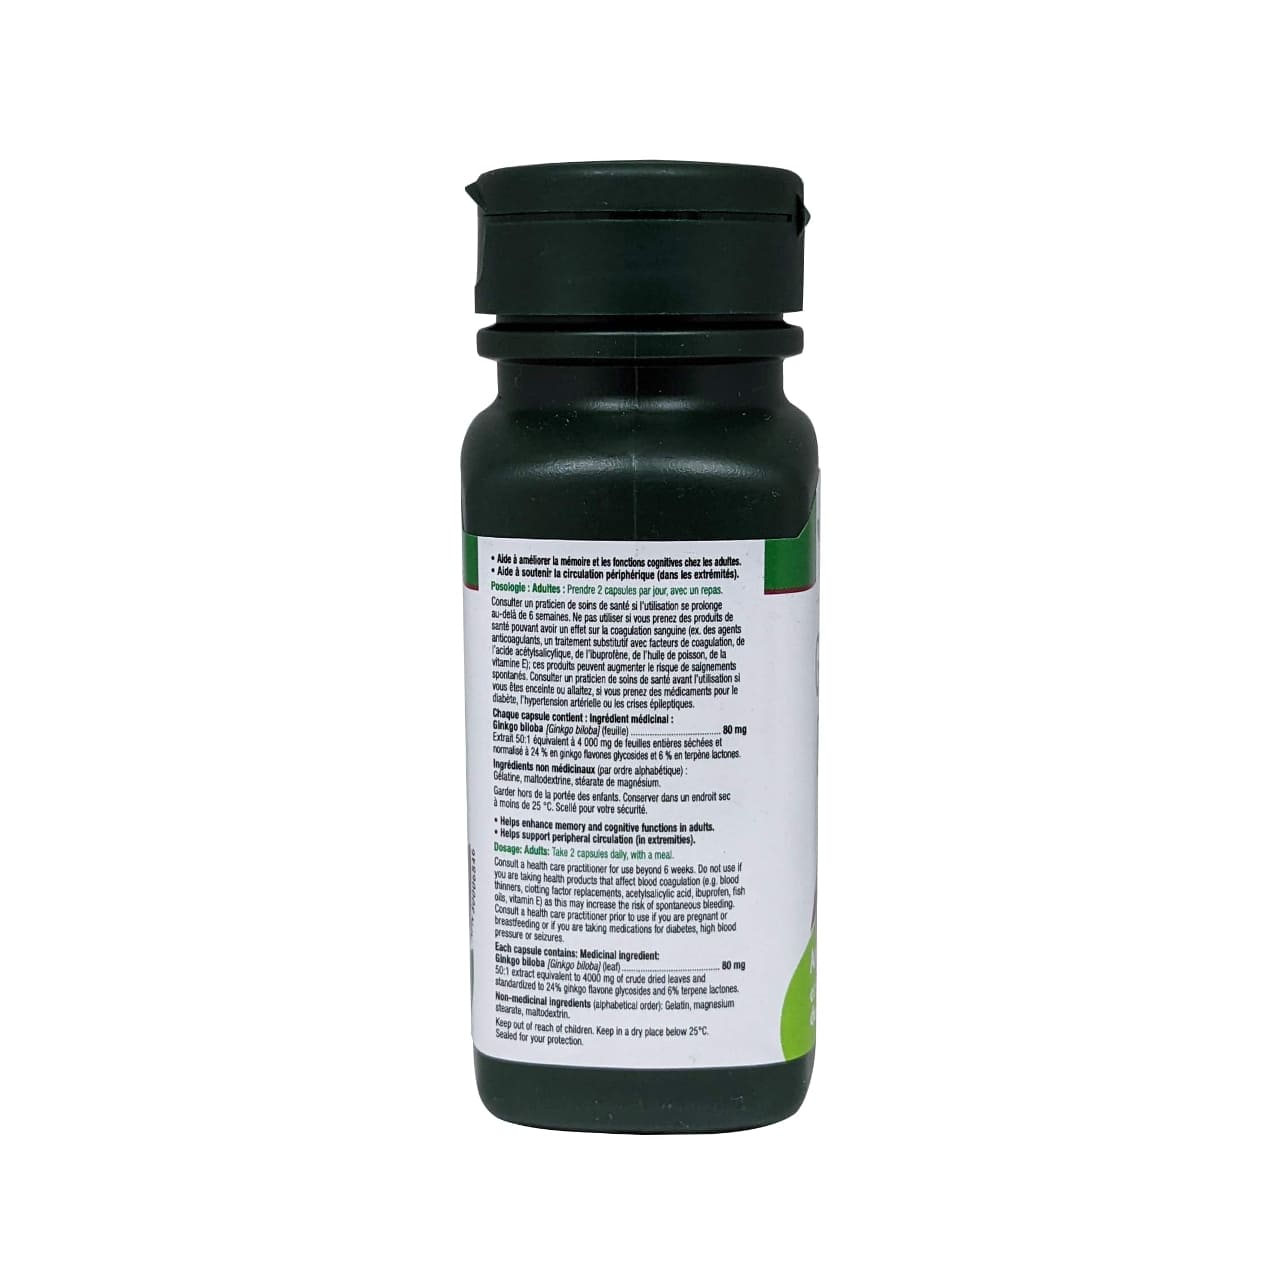 Product details, ingredients, directions, and warnings for Adrien Gagnon Ginkgo Biloba.